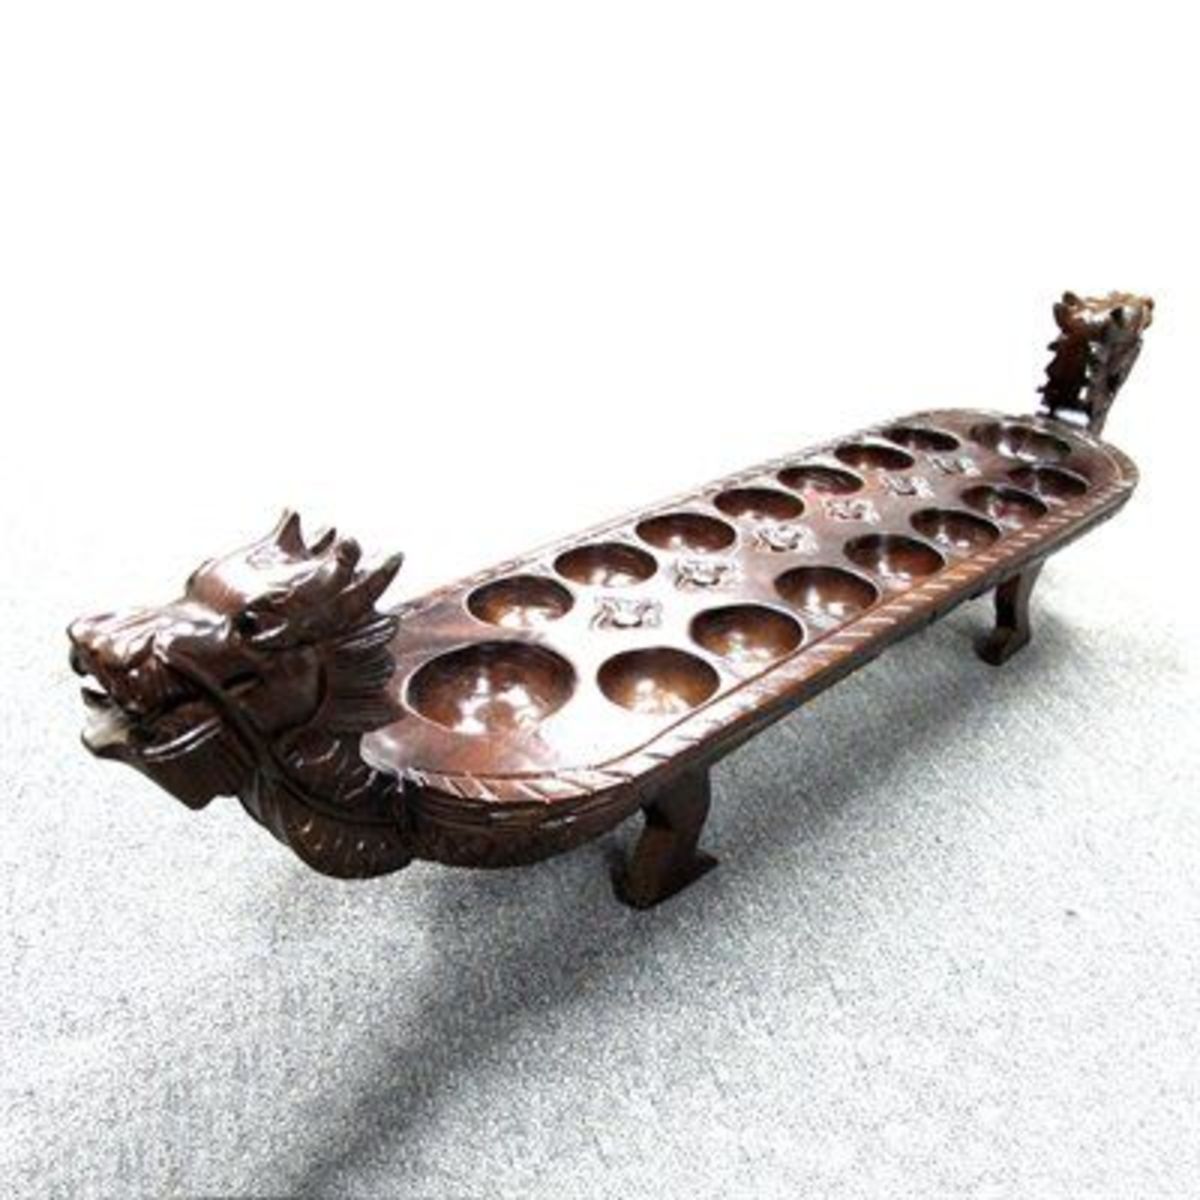 Other Mancala game boards are intricately carved out of wood.